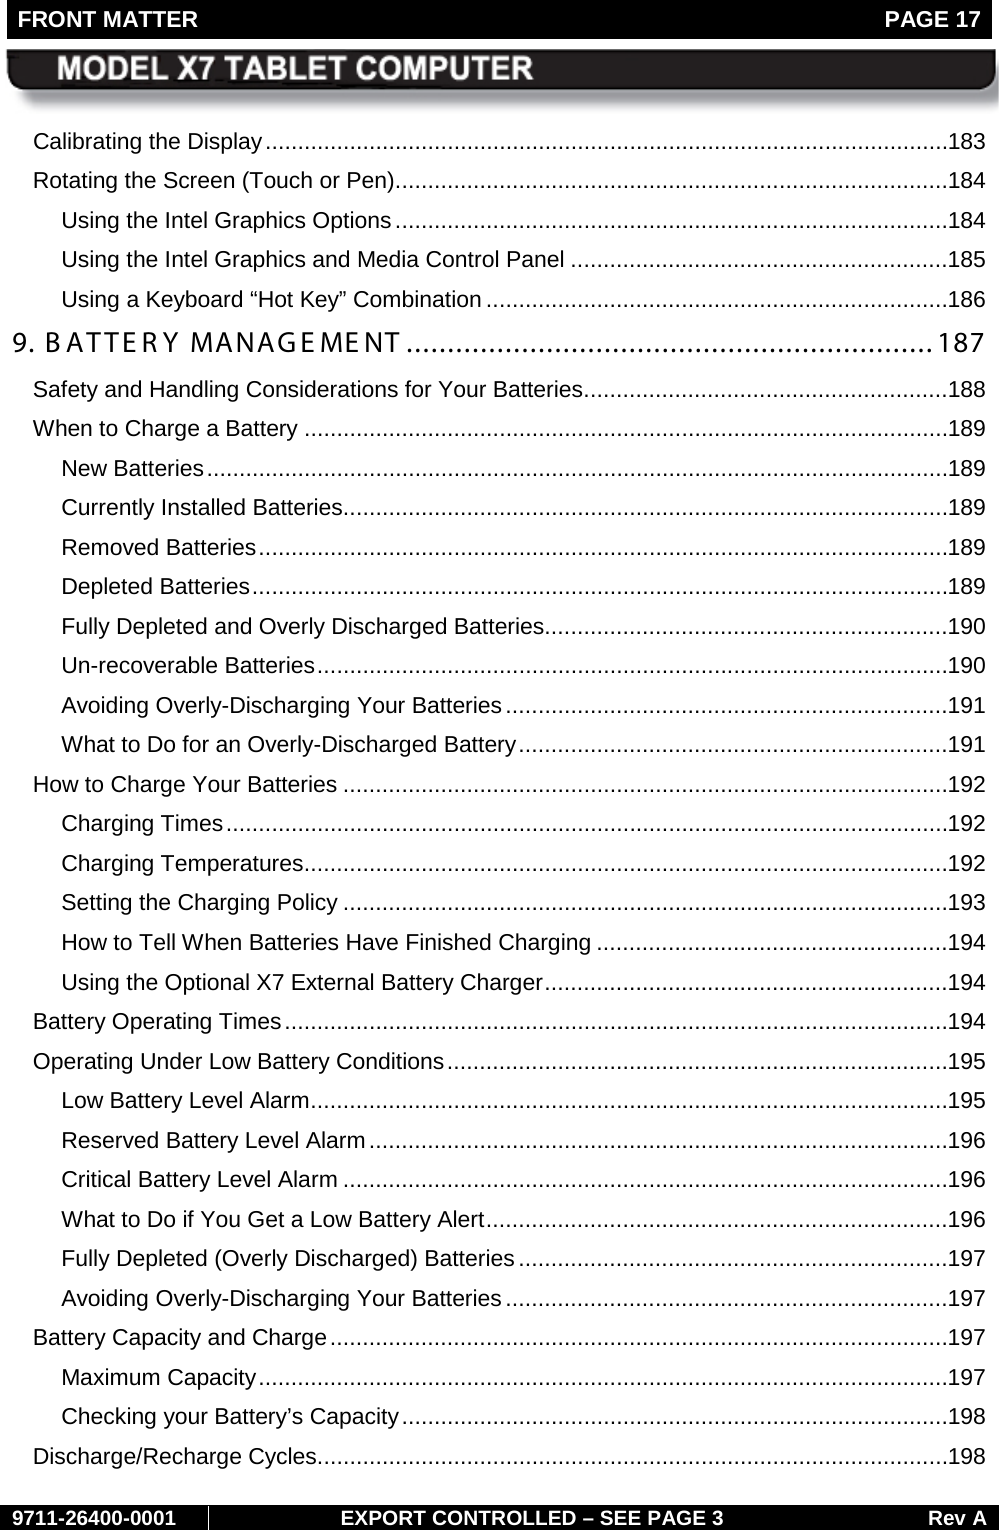 FRONT MATTER   PAGE 17        9711-26400-0001 EXPORT CONTROLLED – SEE PAGE 3 Rev A Calibrating the Display ......................................................................................................... 183 Rotating the Screen (Touch or Pen) ..................................................................................... 184 Using the Intel Graphics Options ..................................................................................... 184 Using the Intel Graphics and Media Control Panel .......................................................... 185 Using a Keyboard “Hot Key” Combination ....................................................................... 186 9. BATTERY MANAGEMENT ................................................................ 187 Safety and Handling Considerations for Your Batteries ........................................................ 188 When to Charge a Battery ................................................................................................... 189 New Batteries .................................................................................................................. 189 Currently Installed Batteries............................................................................................. 189 Removed Batteries .......................................................................................................... 189 Depleted Batteries ........................................................................................................... 189 Fully Depleted and Overly Discharged Batteries .............................................................. 190 Un-recoverable Batteries ................................................................................................. 190 Avoiding Overly-Discharging Your Batteries .................................................................... 191 What to Do for an Overly-Discharged Battery .................................................................. 191 How to Charge Your Batteries ............................................................................................. 192 Charging Times ............................................................................................................... 192 Charging Temperatures ................................................................................................... 192 Setting the Charging Policy ............................................................................................. 193 How to Tell When Batteries Have Finished Charging ...................................................... 194 Using the Optional X7 External Battery Charger .............................................................. 194 Battery Operating Times ...................................................................................................... 194 Operating Under Low Battery Conditions ............................................................................. 195 Low Battery Level Alarm .................................................................................................. 195 Reserved Battery Level Alarm ......................................................................................... 196 Critical Battery Level Alarm ............................................................................................. 196 What to Do if You Get a Low Battery Alert ....................................................................... 196 Fully Depleted (Overly Discharged) Batteries .................................................................. 197 Avoiding Overly-Discharging Your Batteries .................................................................... 197 Battery Capacity and Charge ............................................................................................... 197 Maximum Capacity .......................................................................................................... 197 Checking your Battery’s Capacity .................................................................................... 198 Discharge/Recharge Cycles................................................................................................. 198 